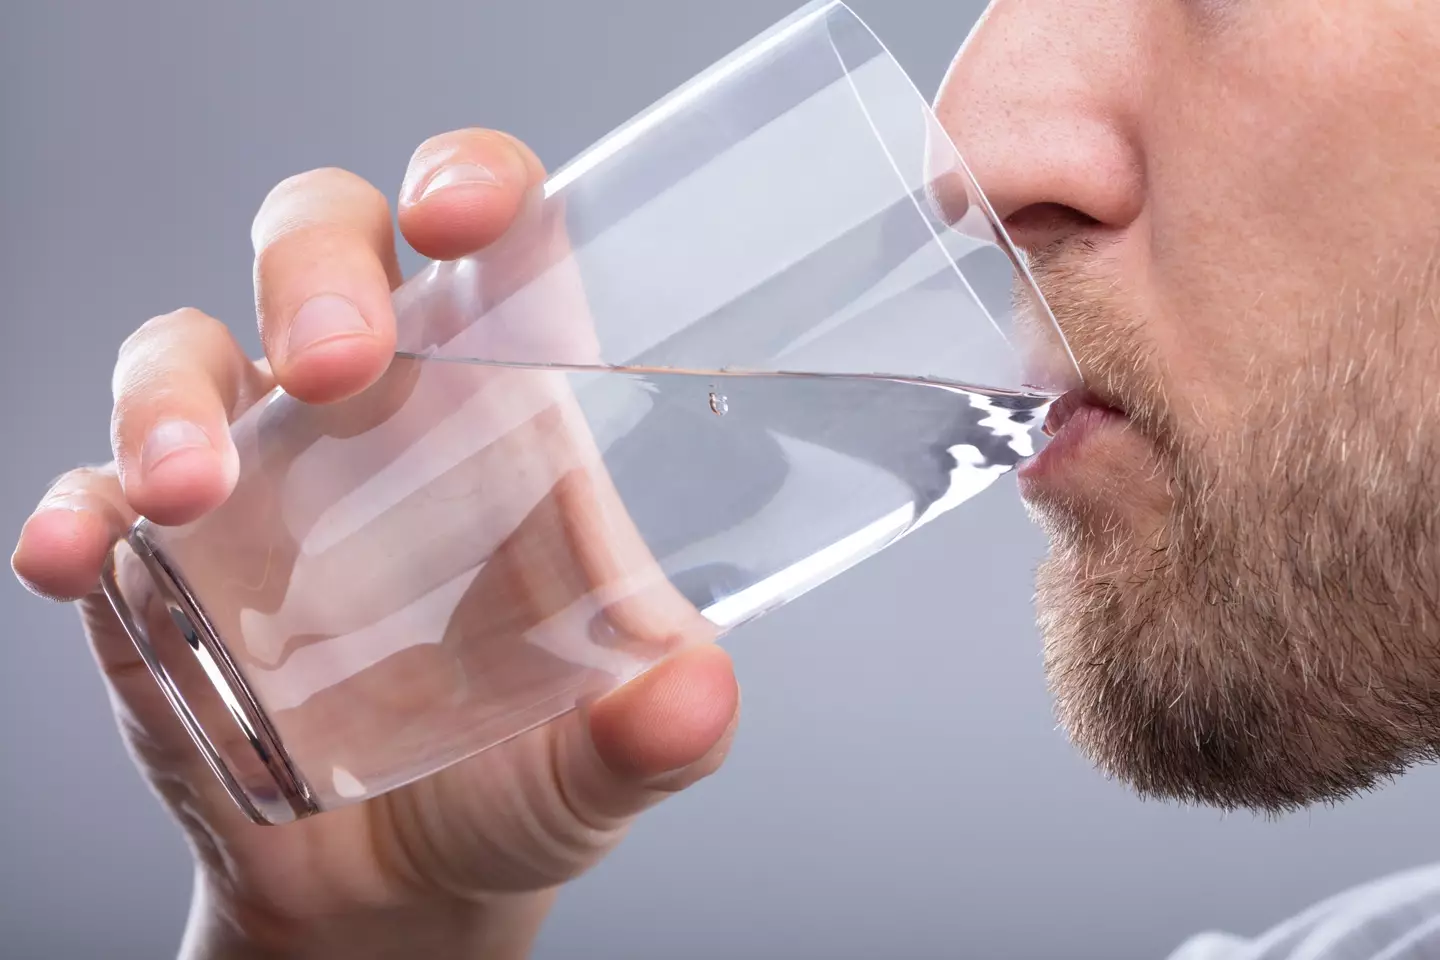 The findings revealed that eight glasses of water might be more than what people actually need.